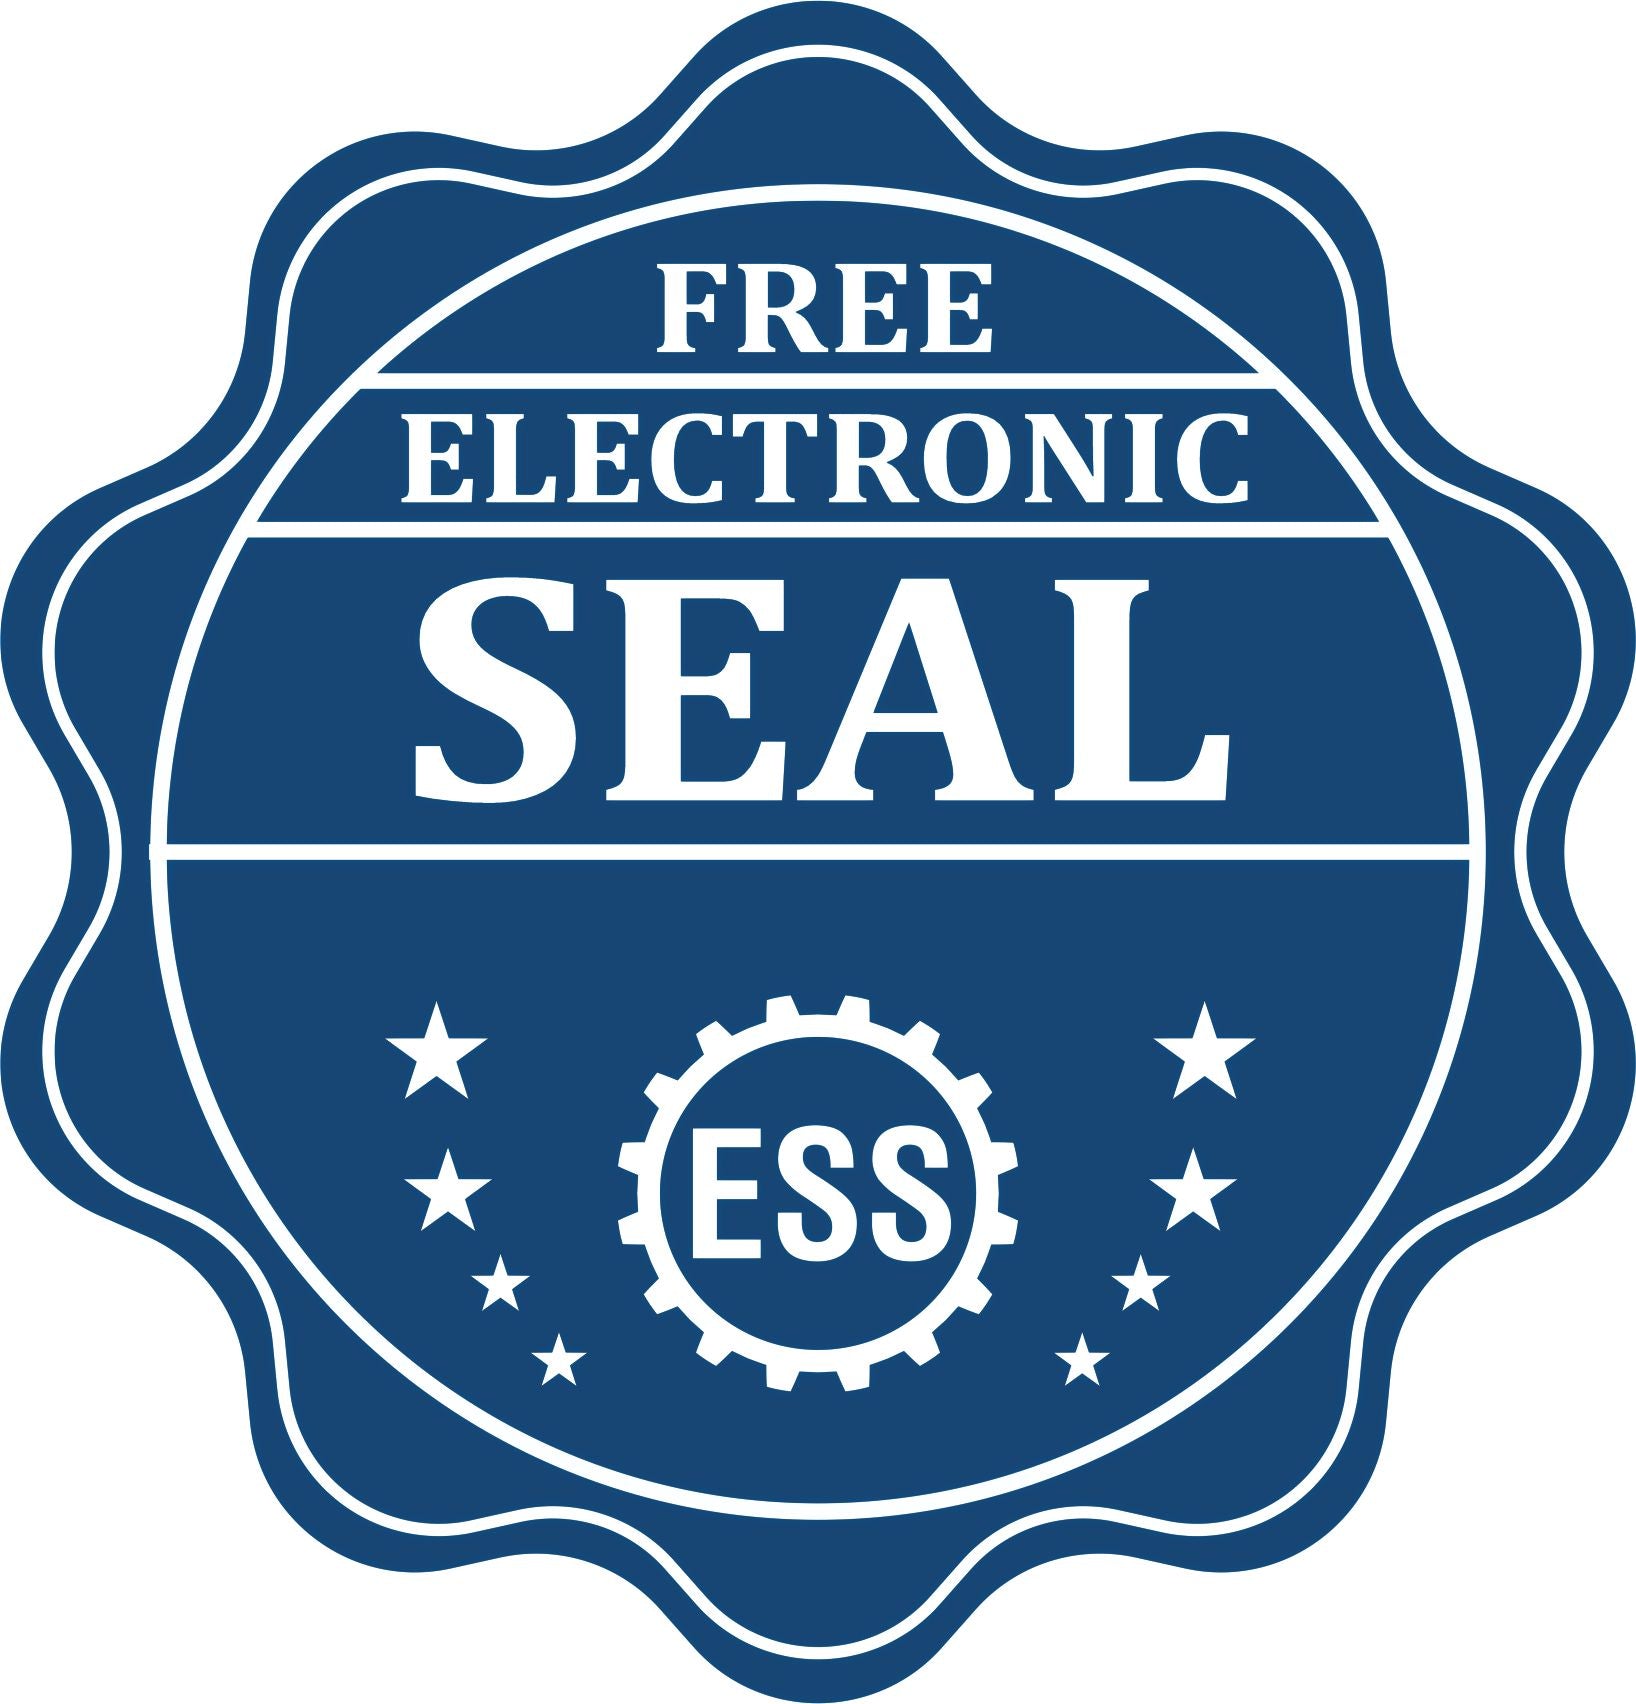 A badge showing a free electronic seal for the Soft Pocket Guam Landscape Architect Embosser with stars and the ESS gear on the emblem.